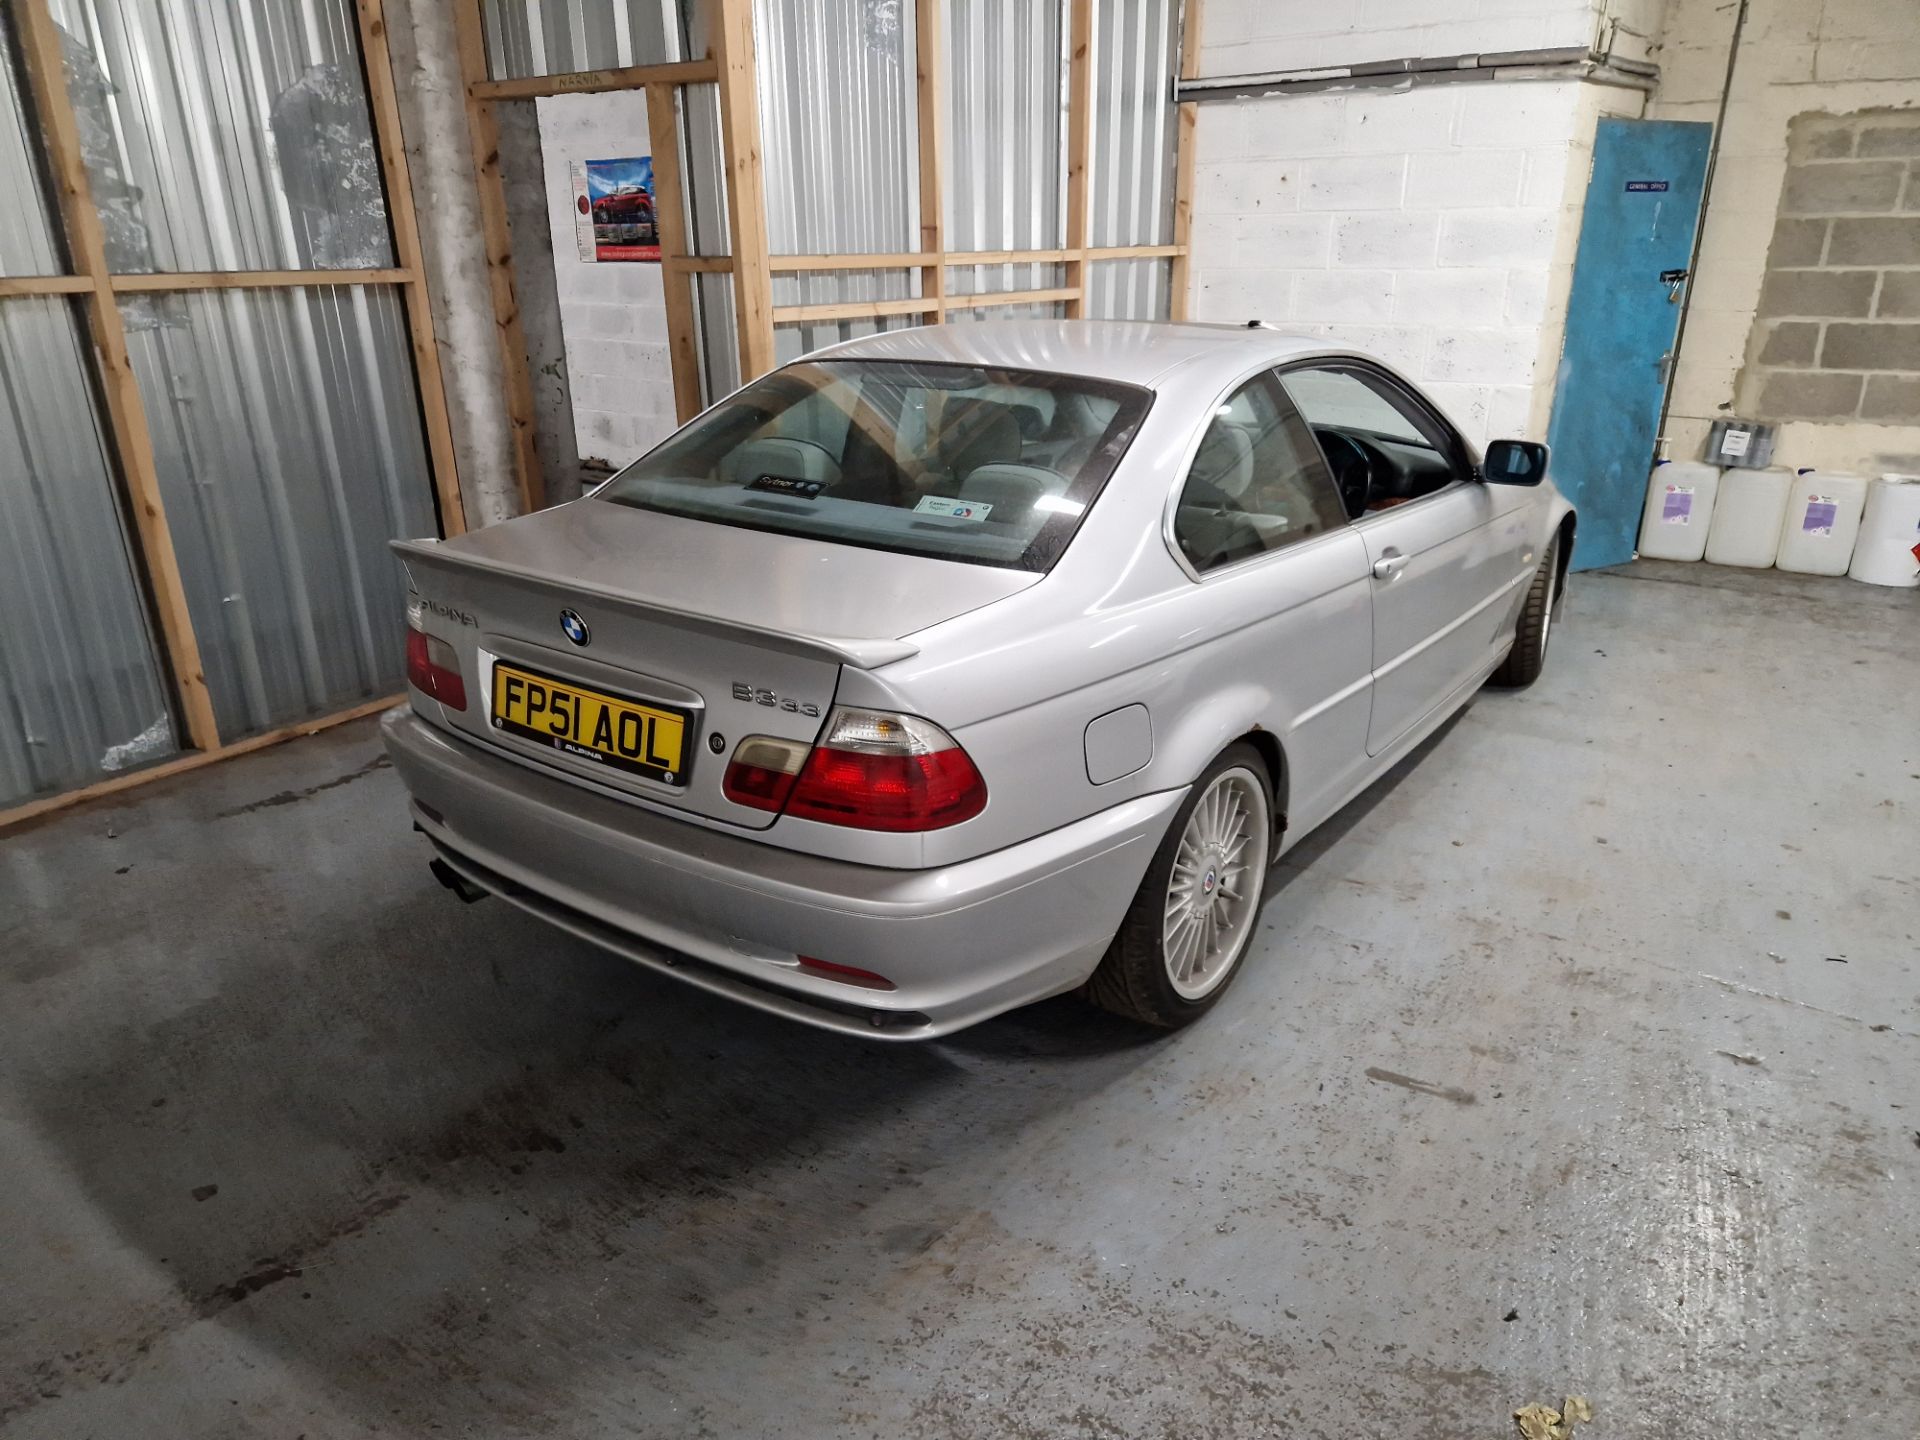 BMW Alpina B3 3.3 Saloon, Registration No. FP51 AOL, Mileage 138,000 (Estimate at time of - Image 3 of 6